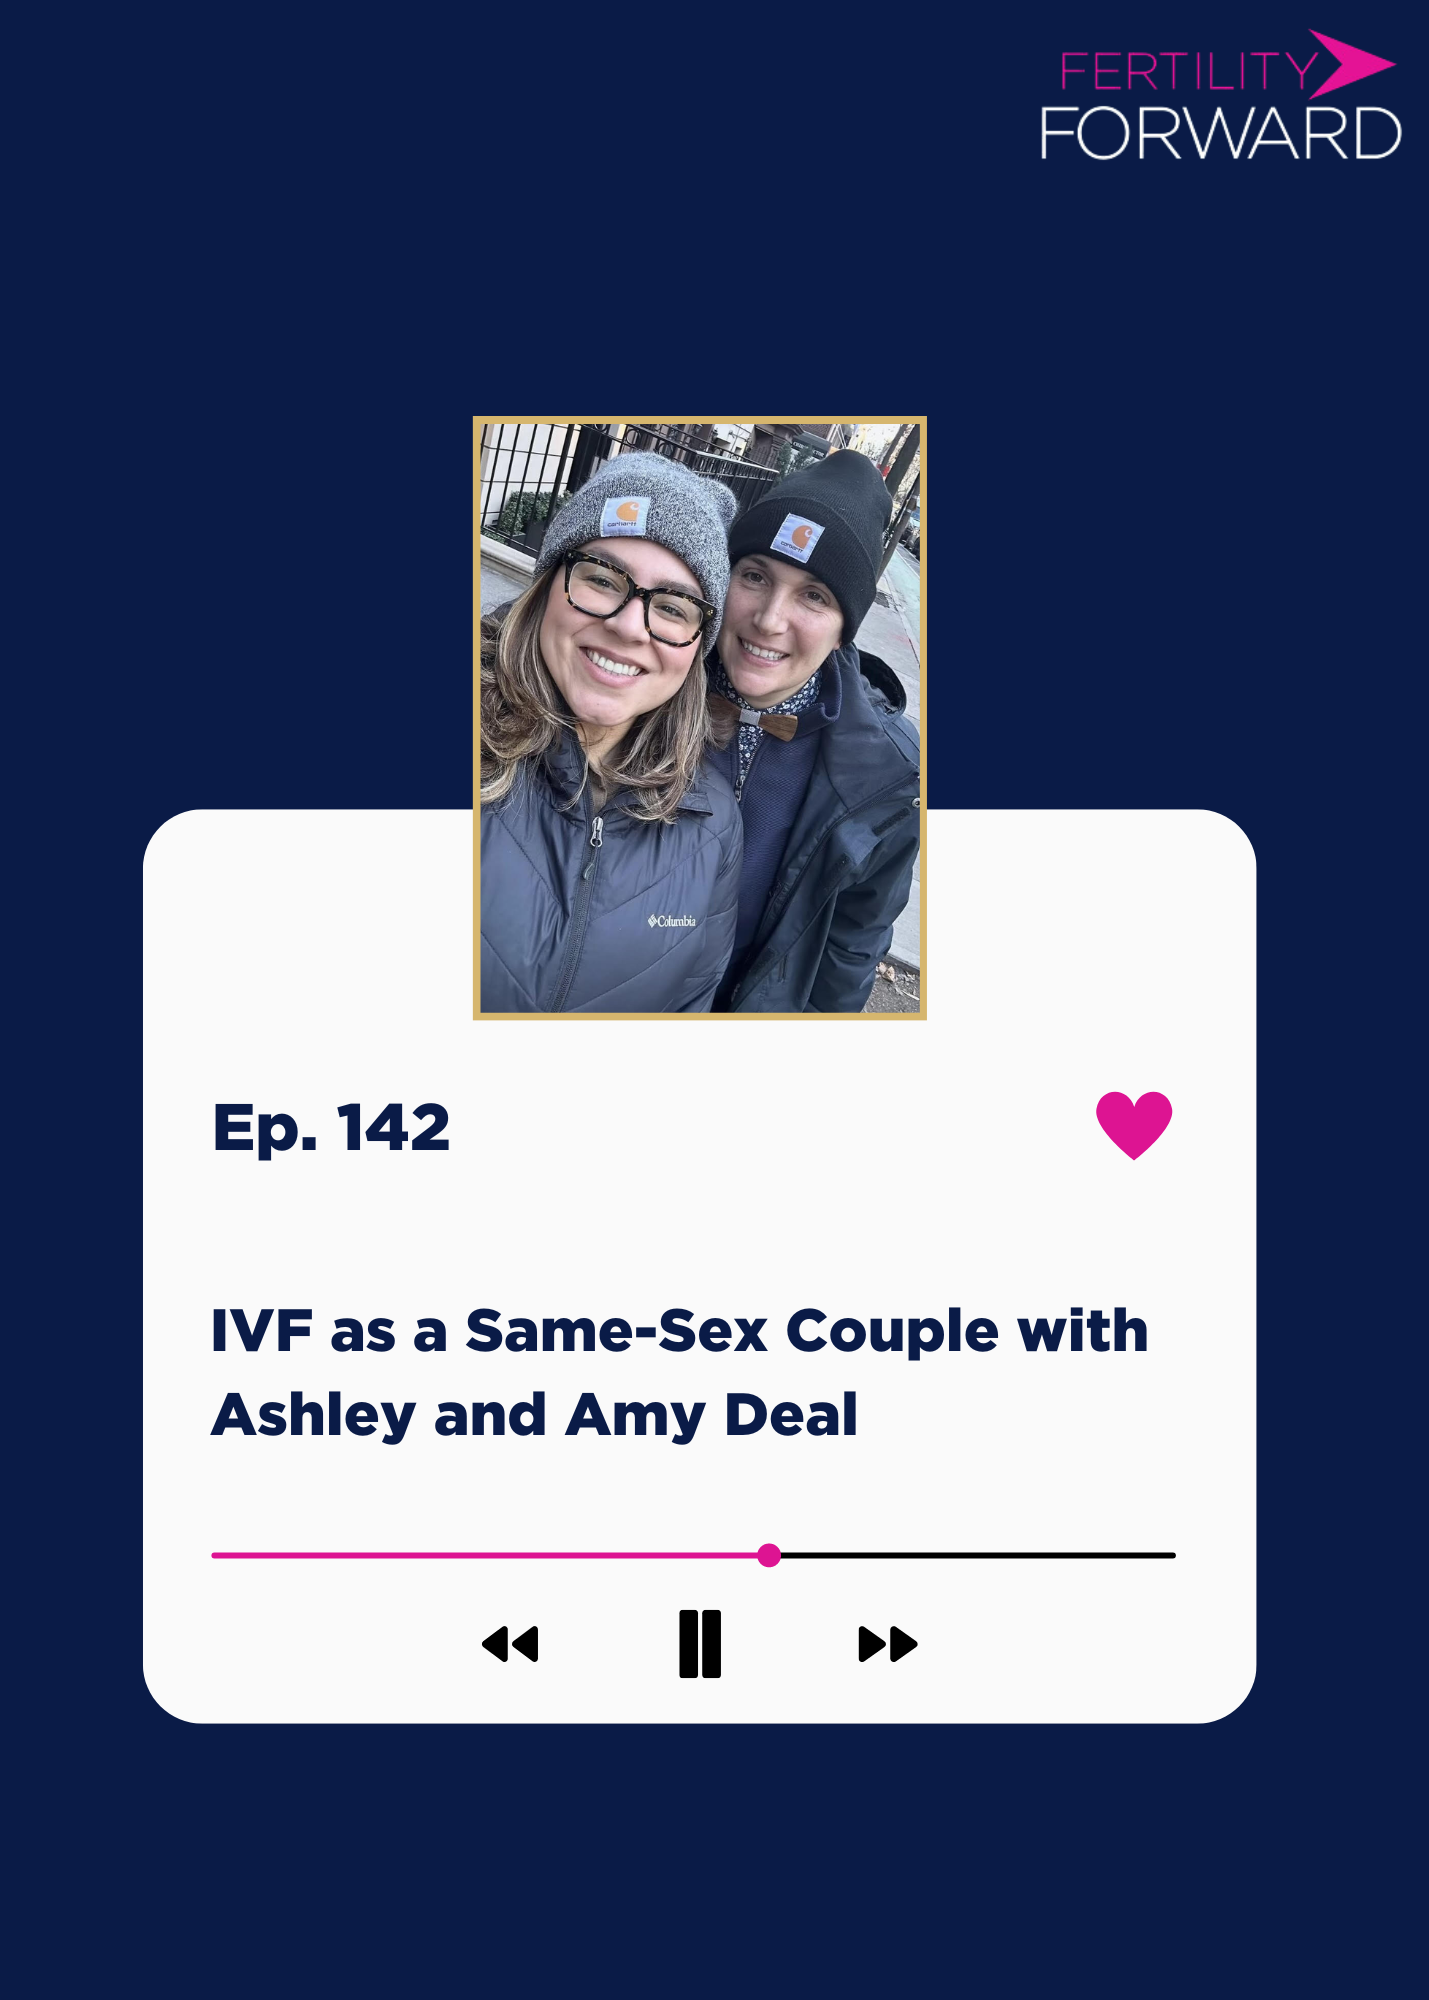 Ep 143: IVF as a Same-Sex Couple with Ashley and Amy Deal